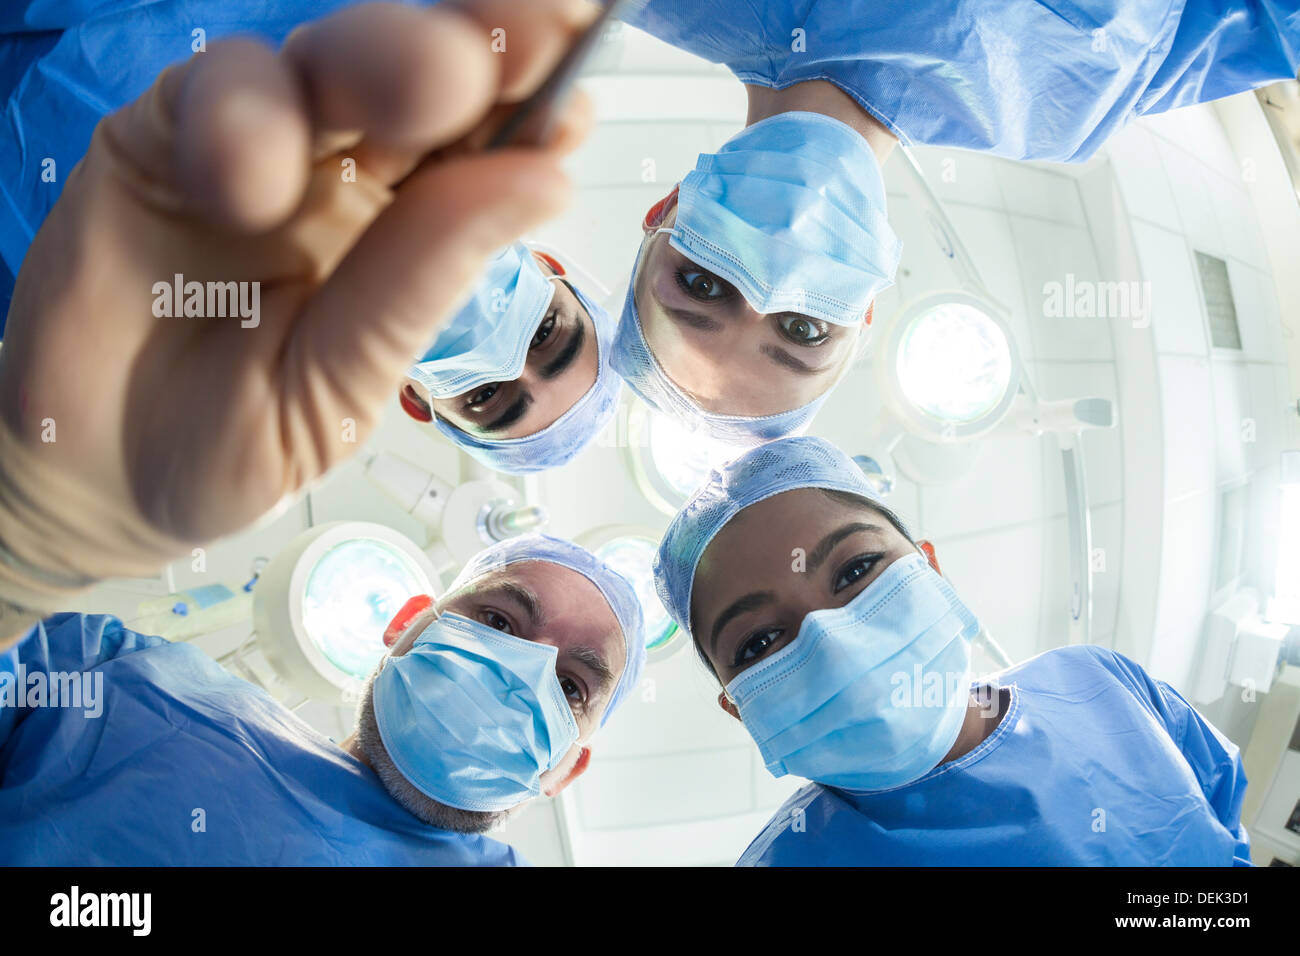 Interracial male female medical hospital doctors surgeons surgical team operating theater performing surgery on a patient Stock Photo